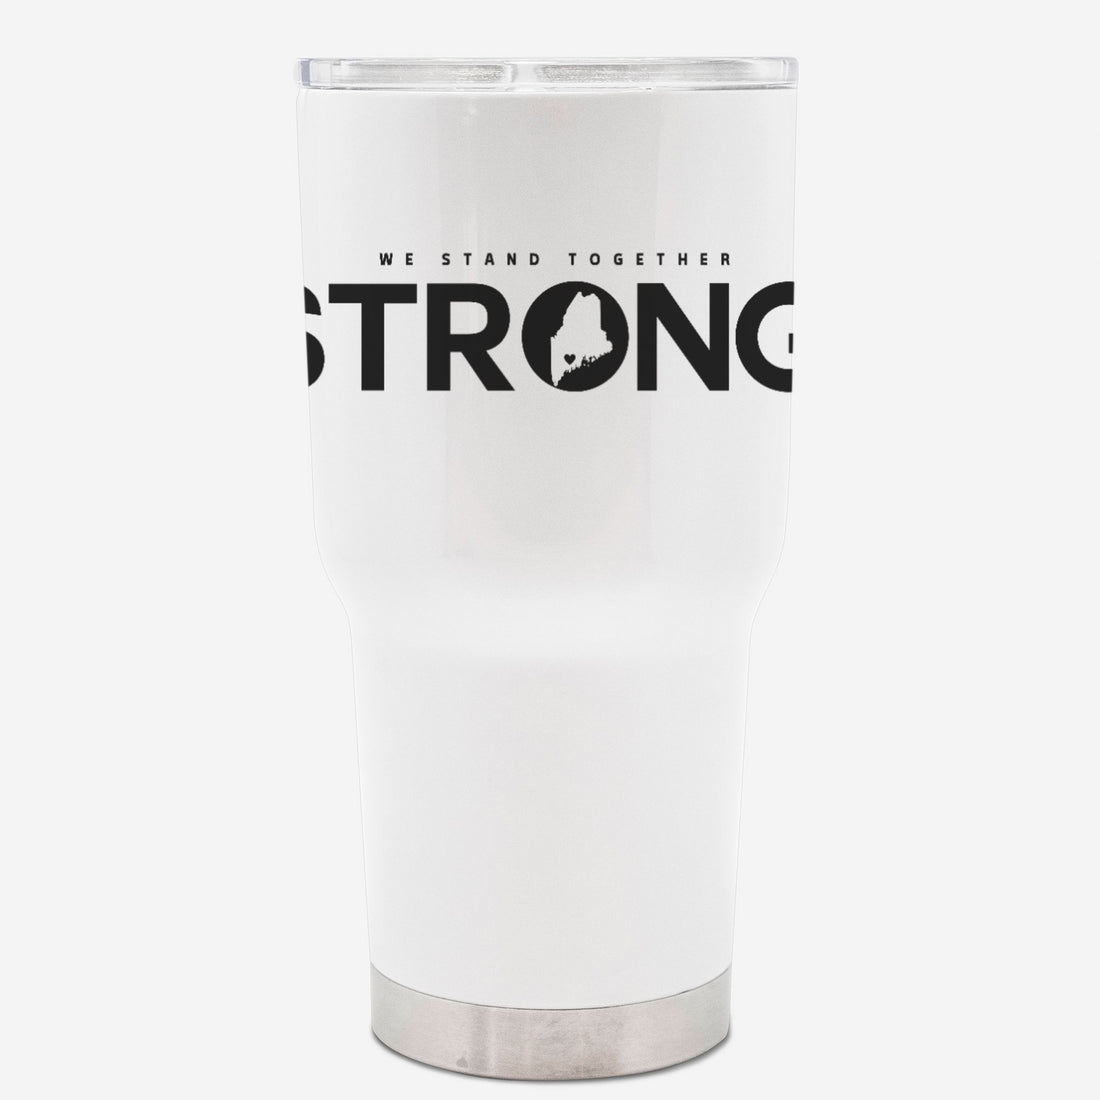 Tumbler 30ozWe Stand Together STRONG.  Maine Support Lewiston Tumbler - ALL proceeds will go to victim funds